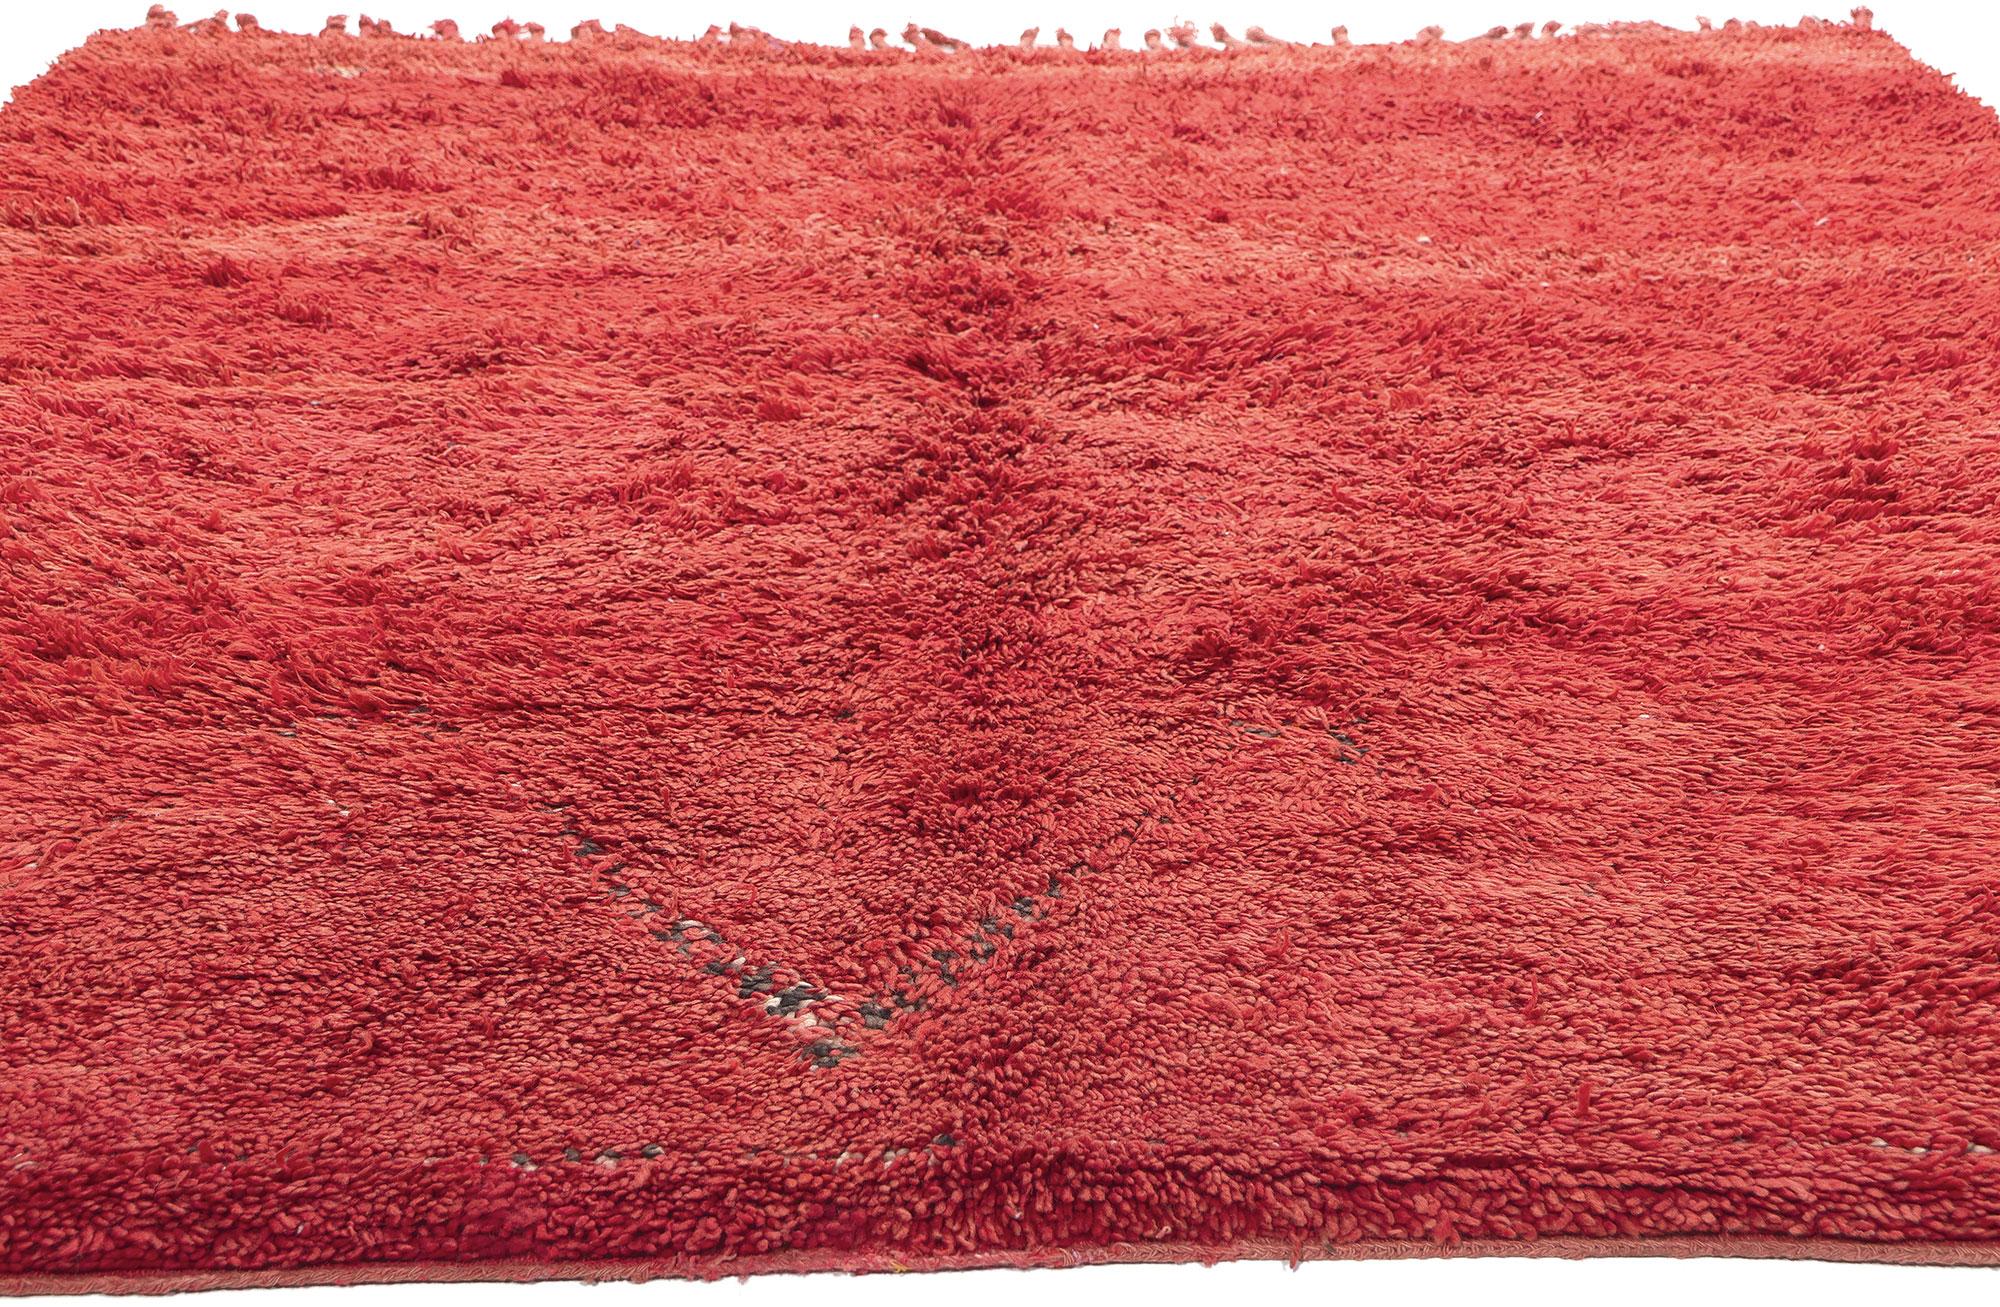 Hand-Knotted Vintage Red Beni MGuild Rug with Hidden Pattern, Midcentury Meets Cozy Nomad For Sale